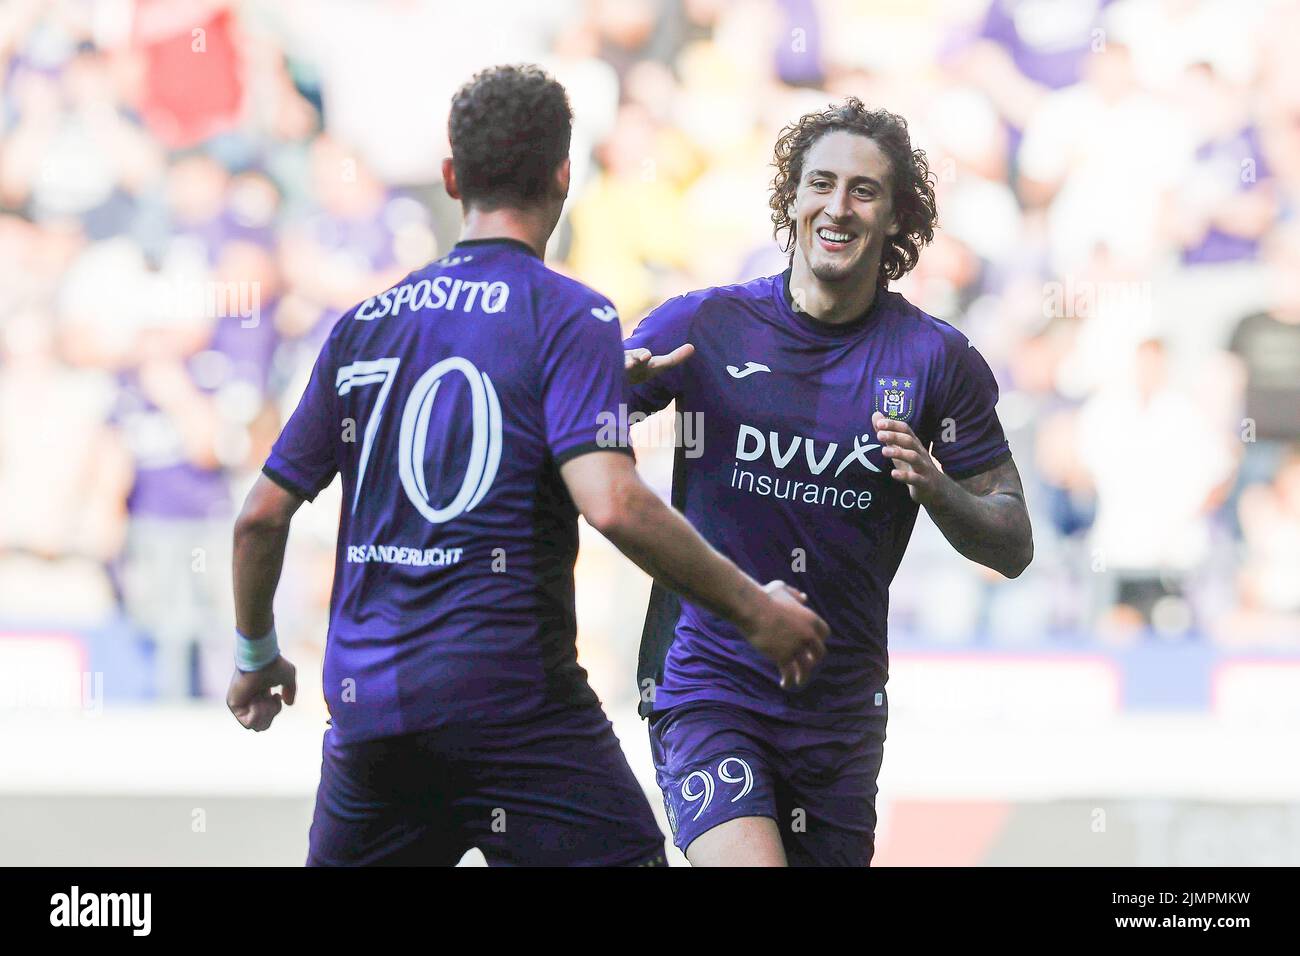 Anderlecht's Fabio Silva celebrates after scoring during a soccer match between RSCA Anderlecht and RFC Seraing, Sunday 07 August 2022 in Anderlecht, Brussels, on day 3 of the 2022-2023 'Jupiler Pro League' first division of the Belgian championship. BELGA PHOTO BRUNO FAHY Stock Photo